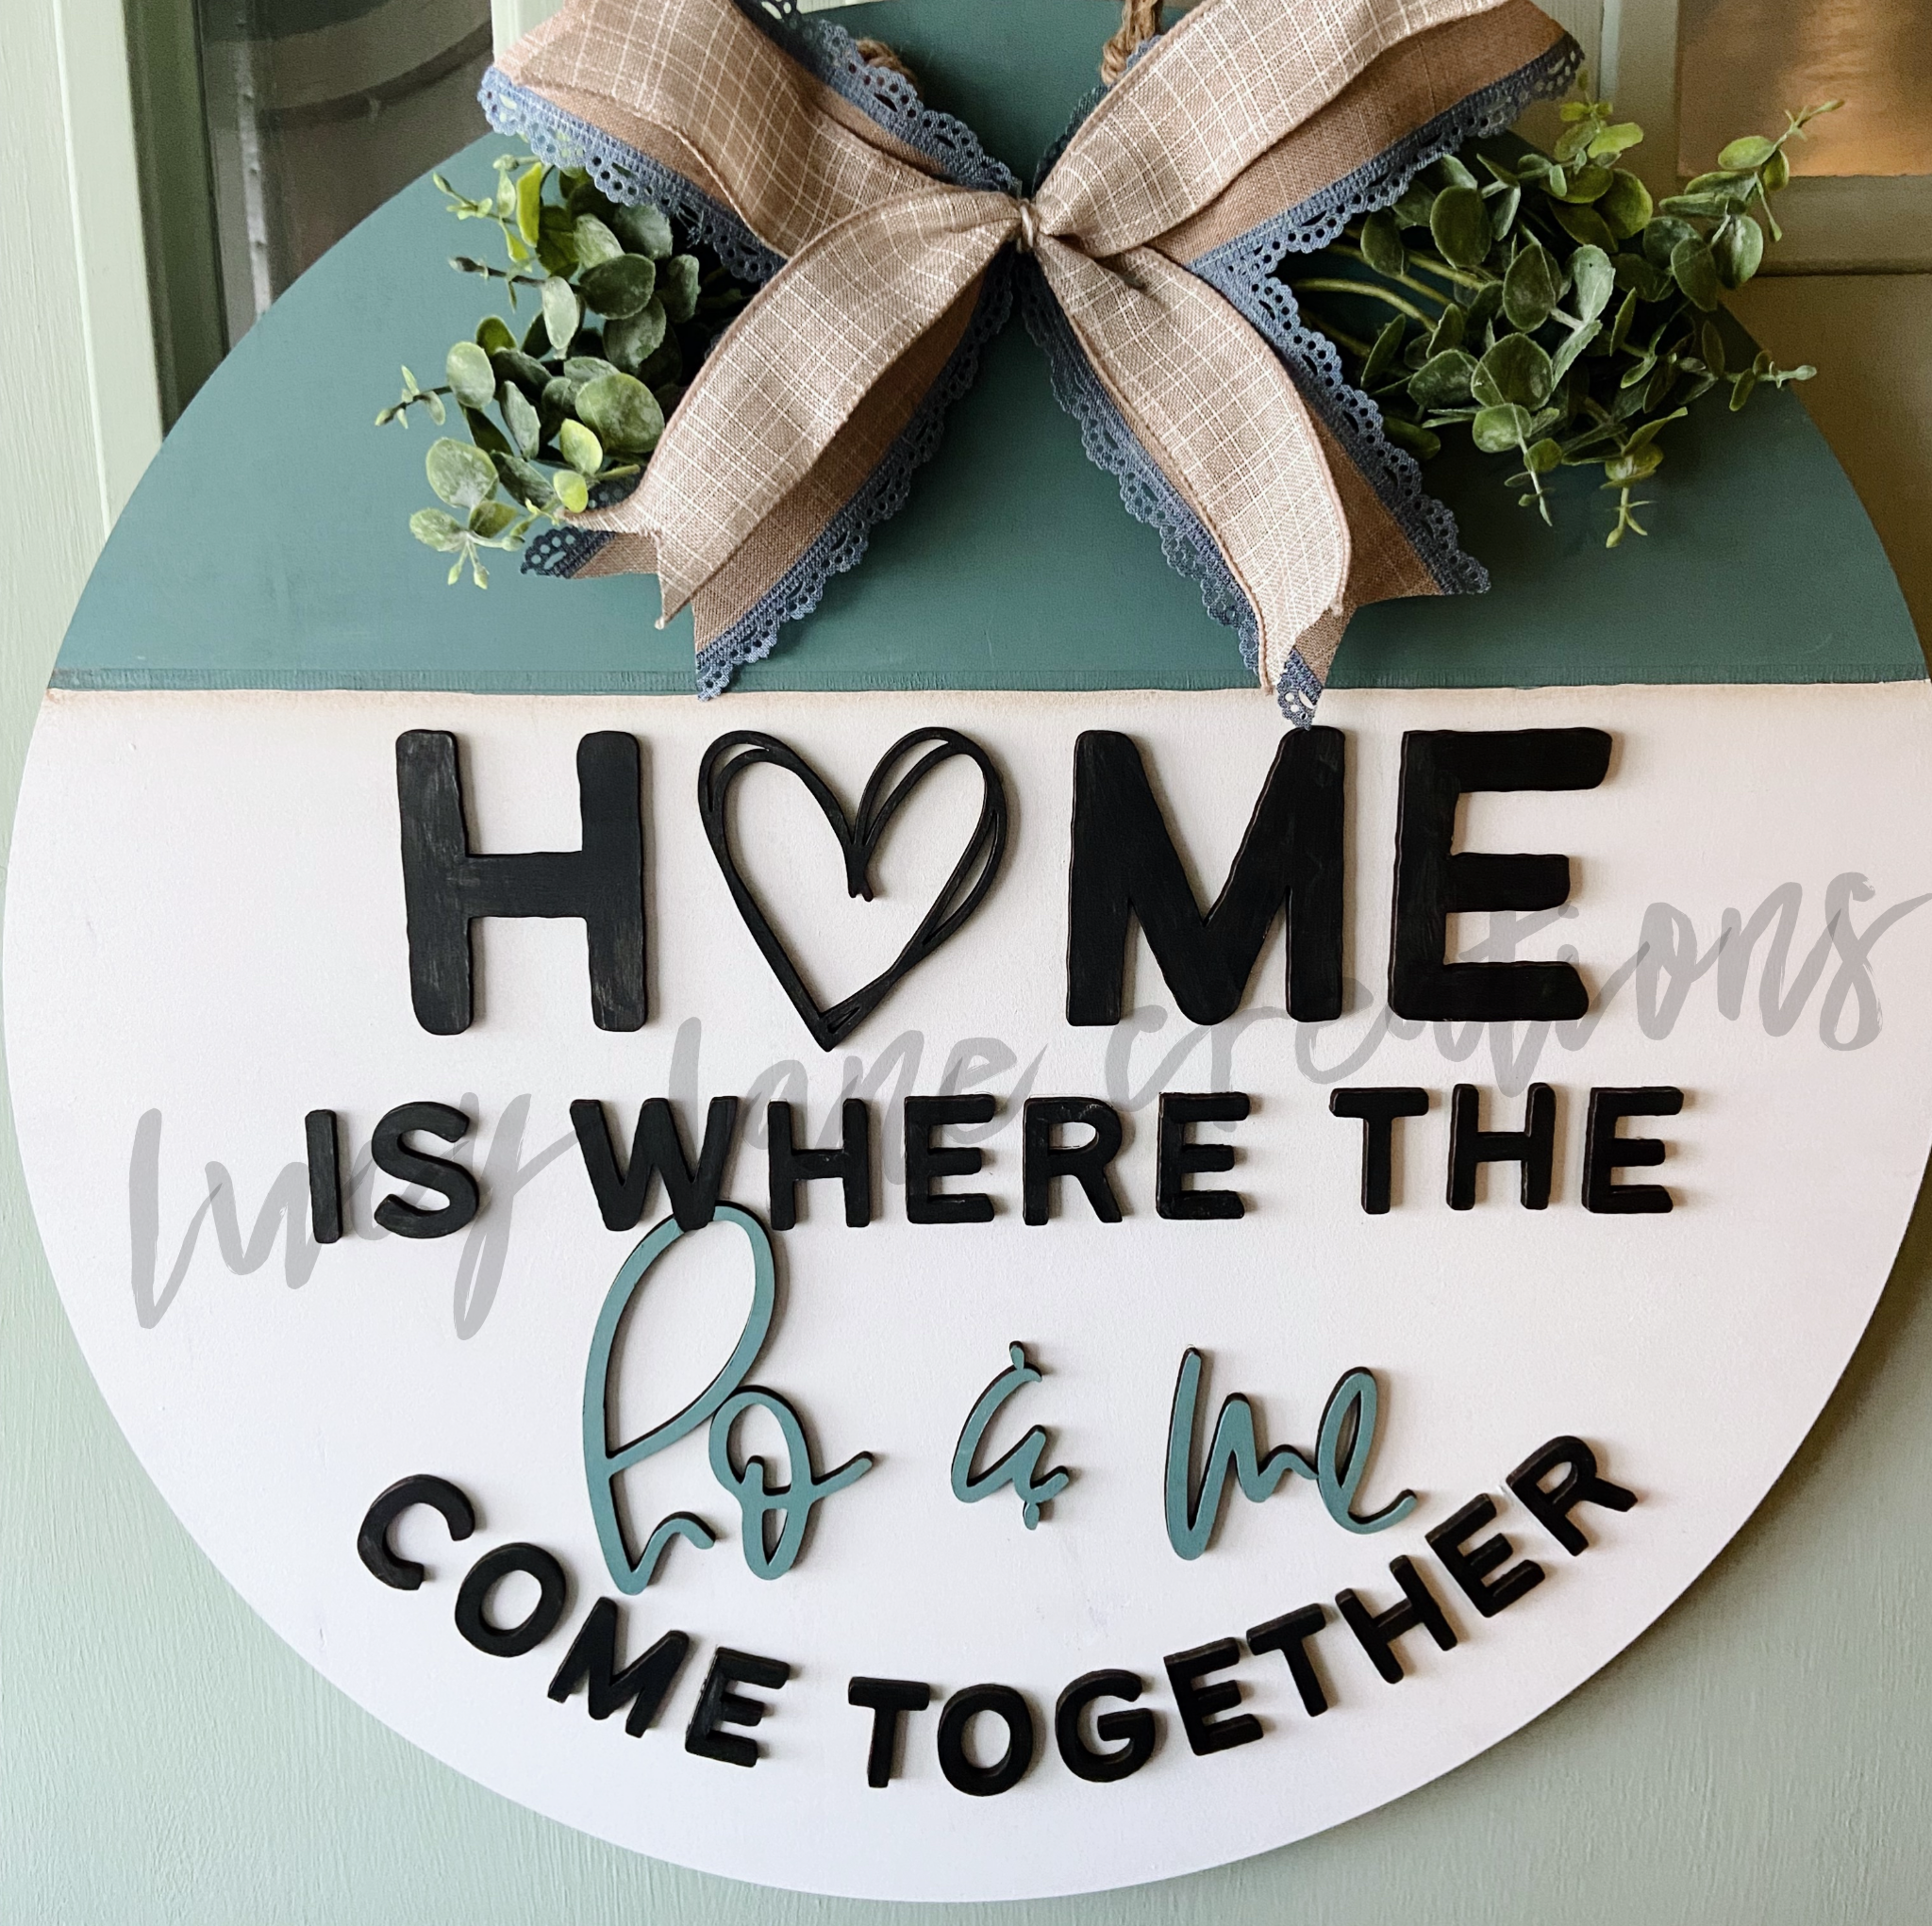 Home is where the…